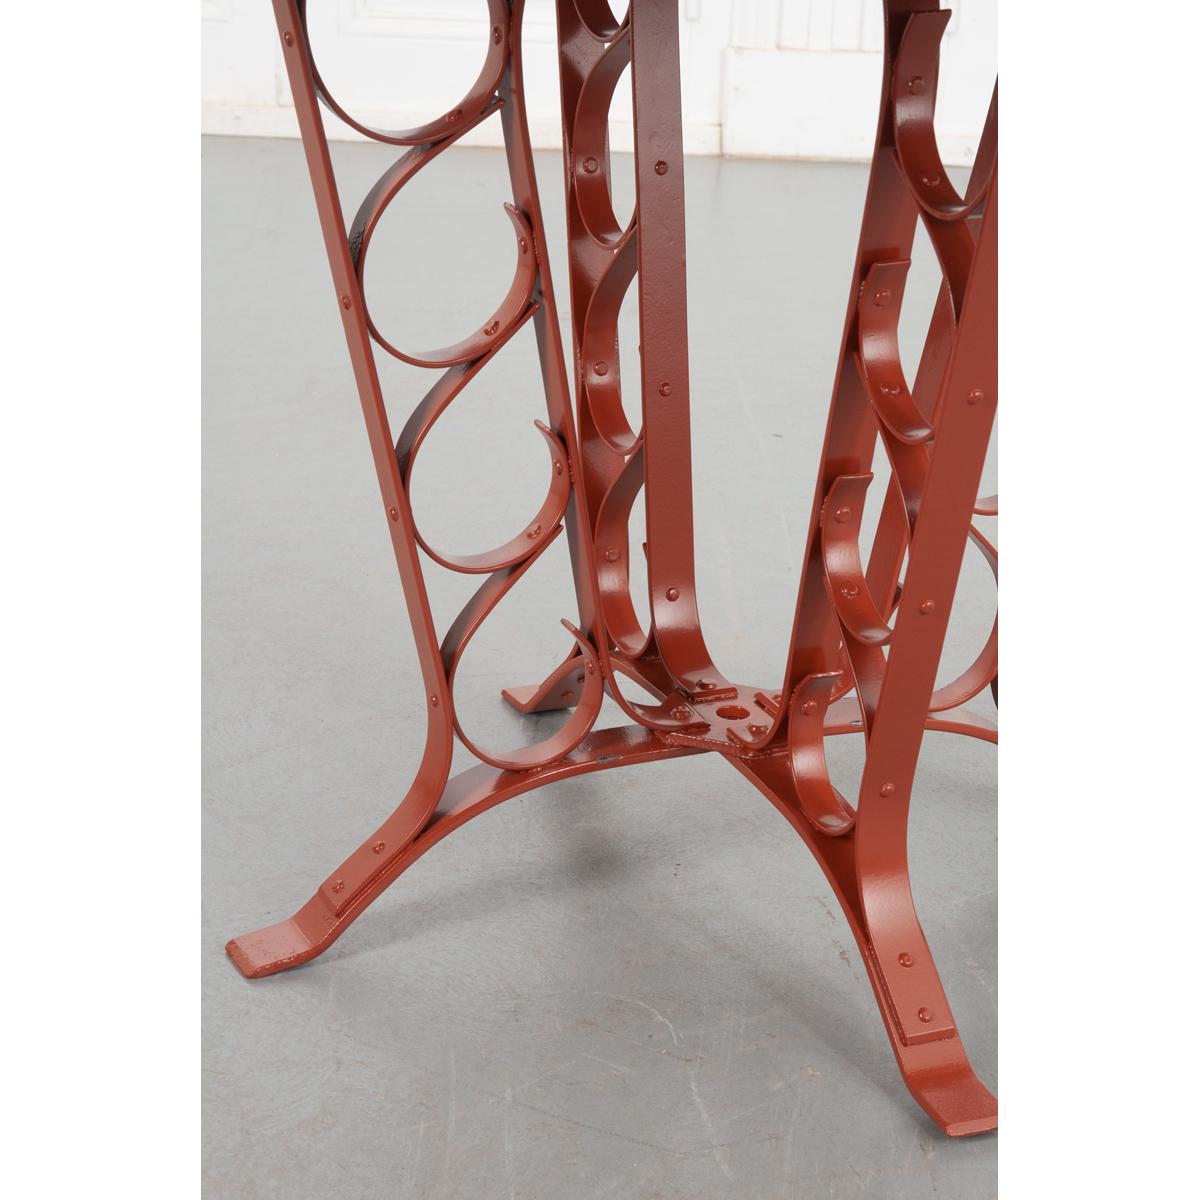 This charming vintage garden table comes from France. Made of metal it’s been sandblasted and powder-coated red for protection against the elements. The top is smooth with a hole for an umbrella measuring 1-?” in diameter. The legs have great